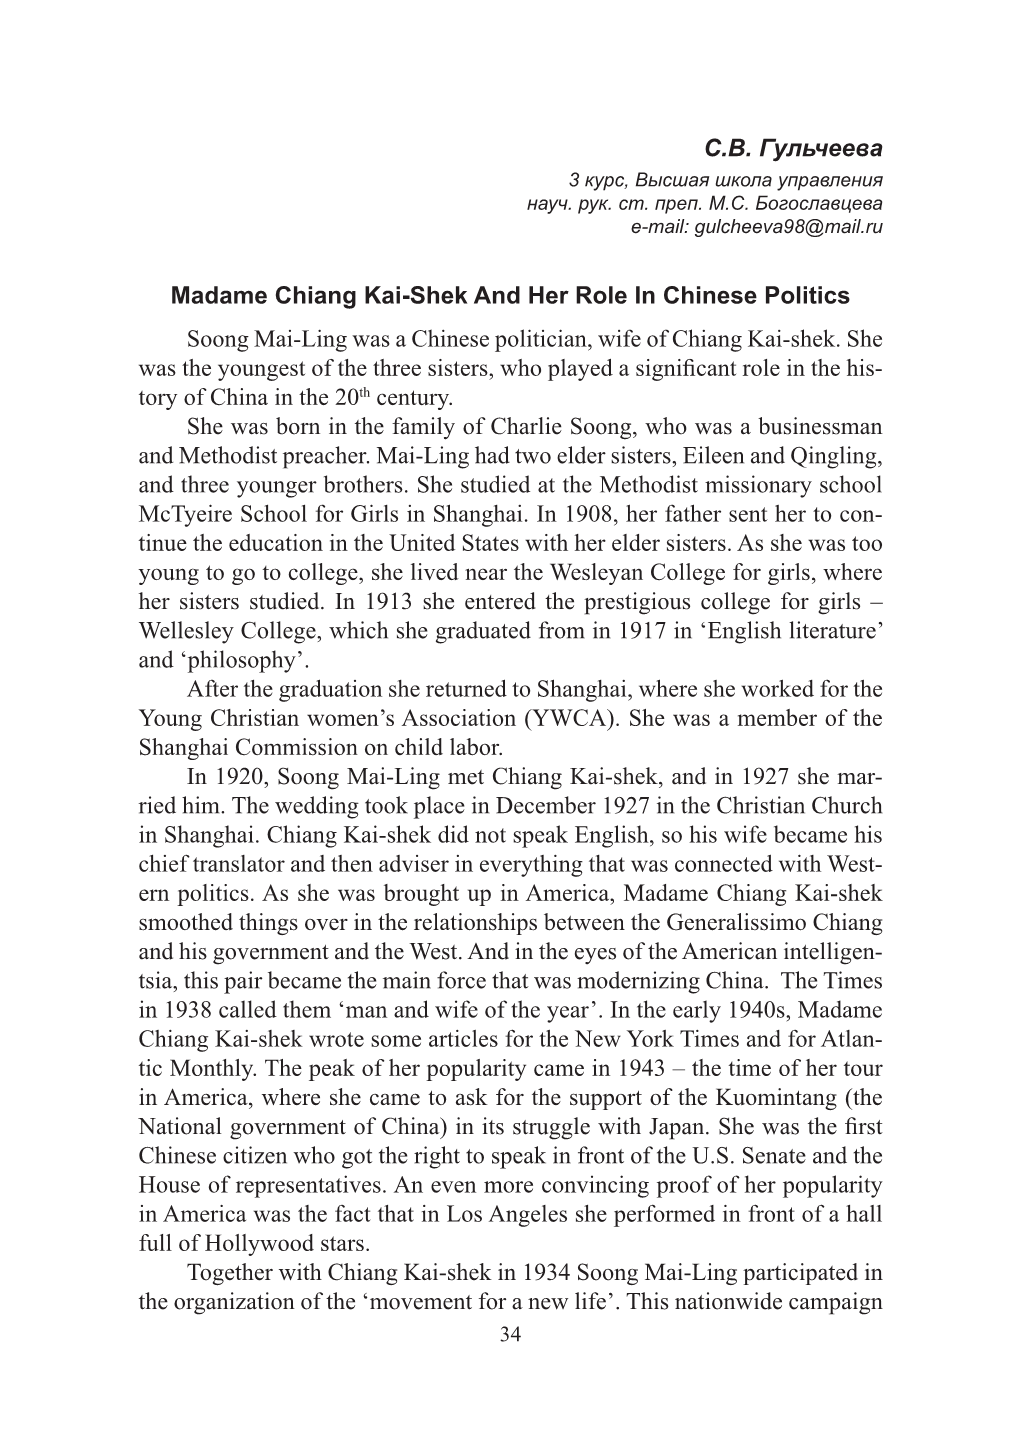 С.В. Гульчеева Madame Chiang Kai-Shek and Her Role in Chinese